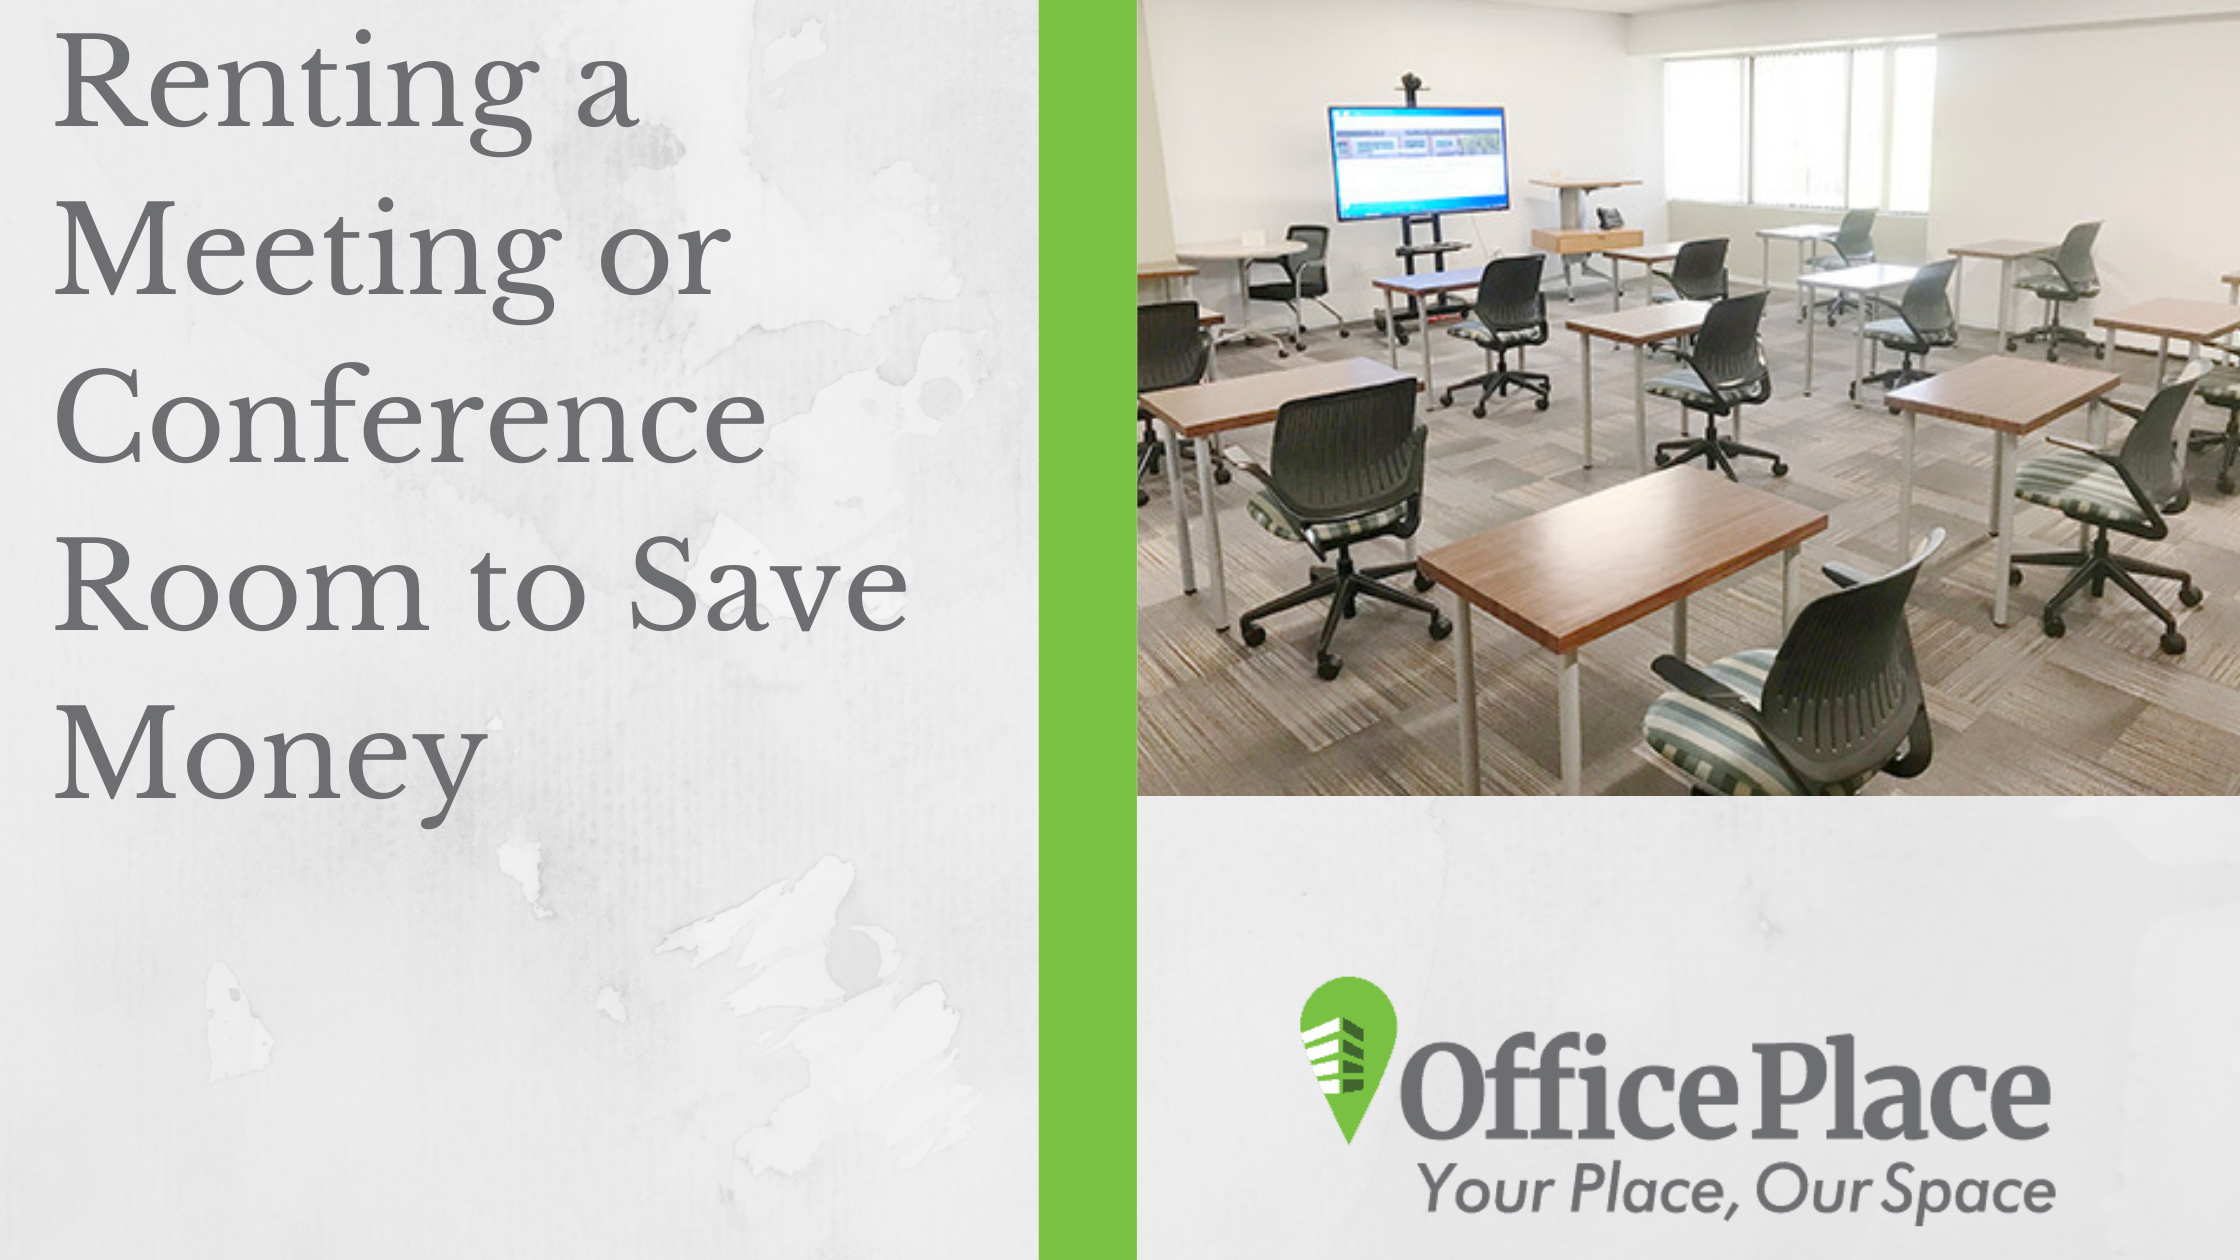 Renting a Meeting or Conference Room to Save Money